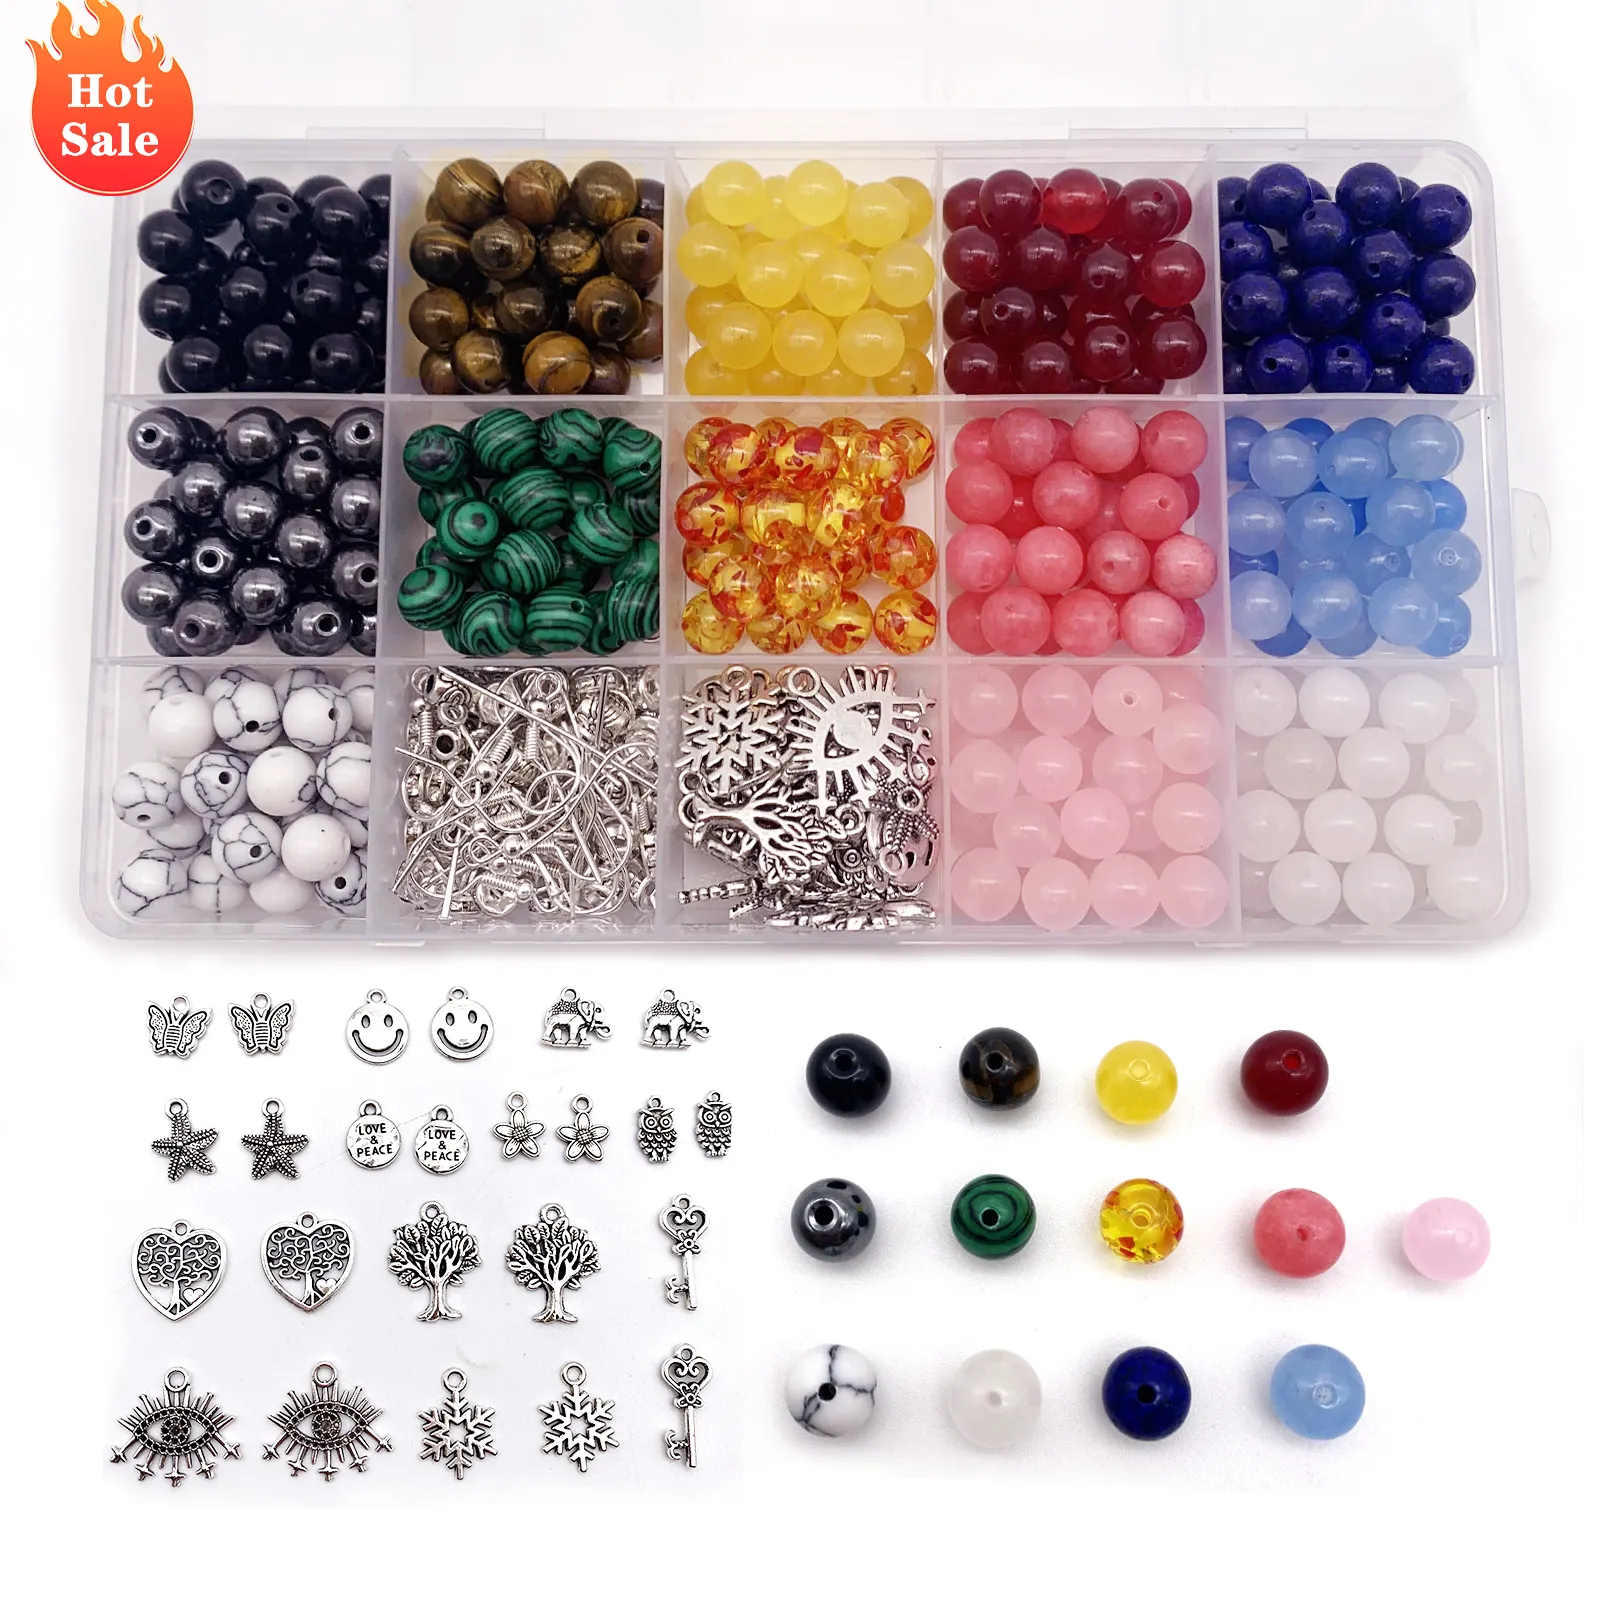 451pcs 8mm Natural Stone Beads for Bracelet Making Healing Crystals Gemstone DIY Kit earrings for jewelry making